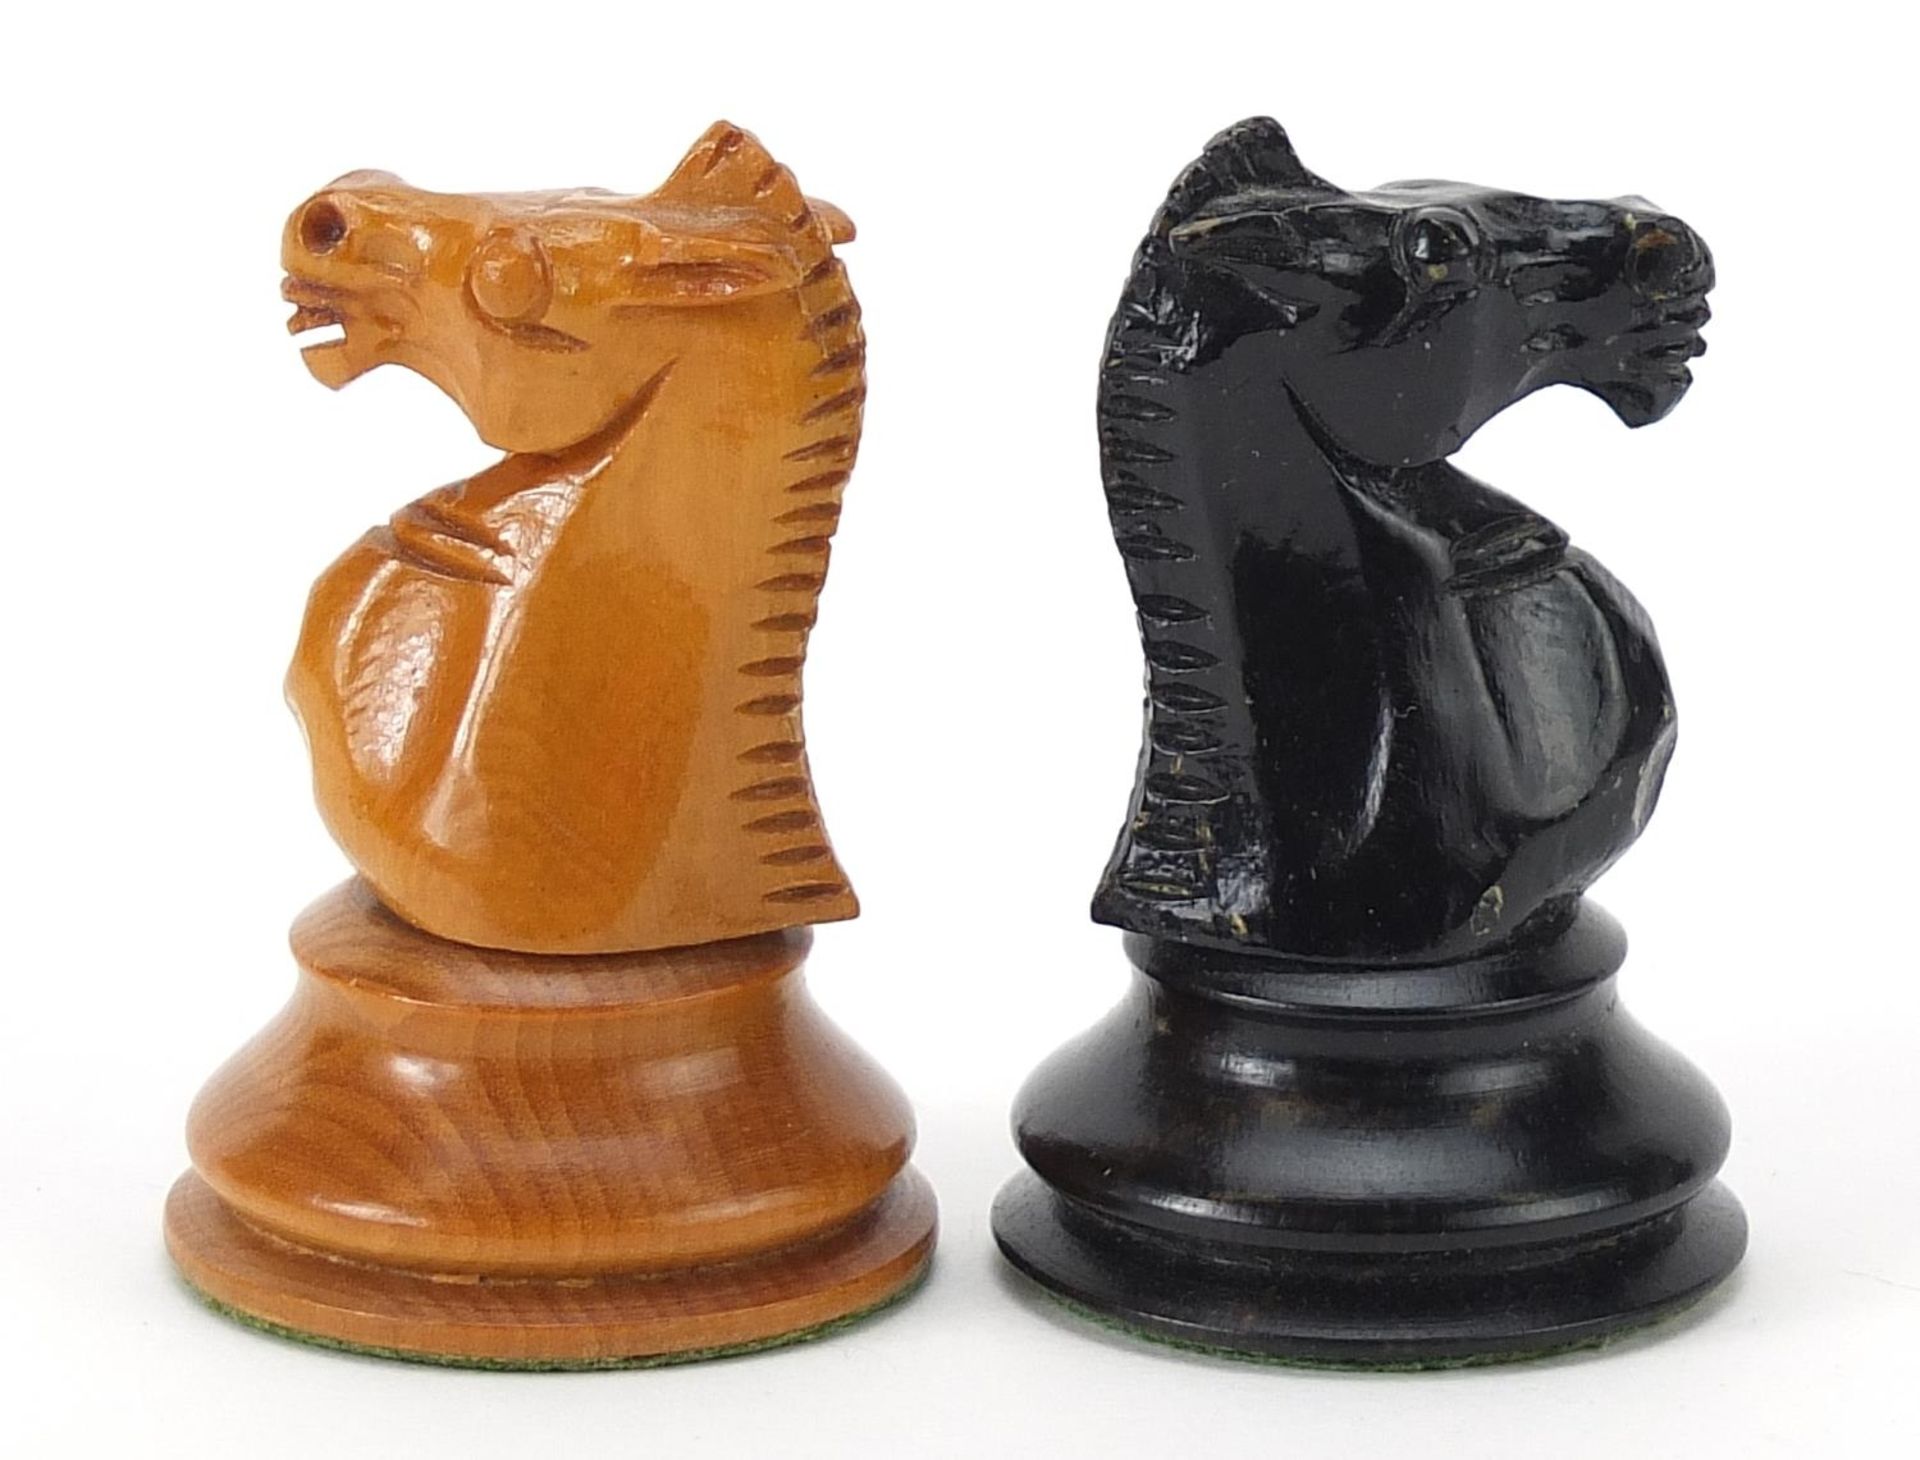 Ebony and boxwood Staunton pattern chess set with folding board, the largest pieces each 8cm high - Image 6 of 7